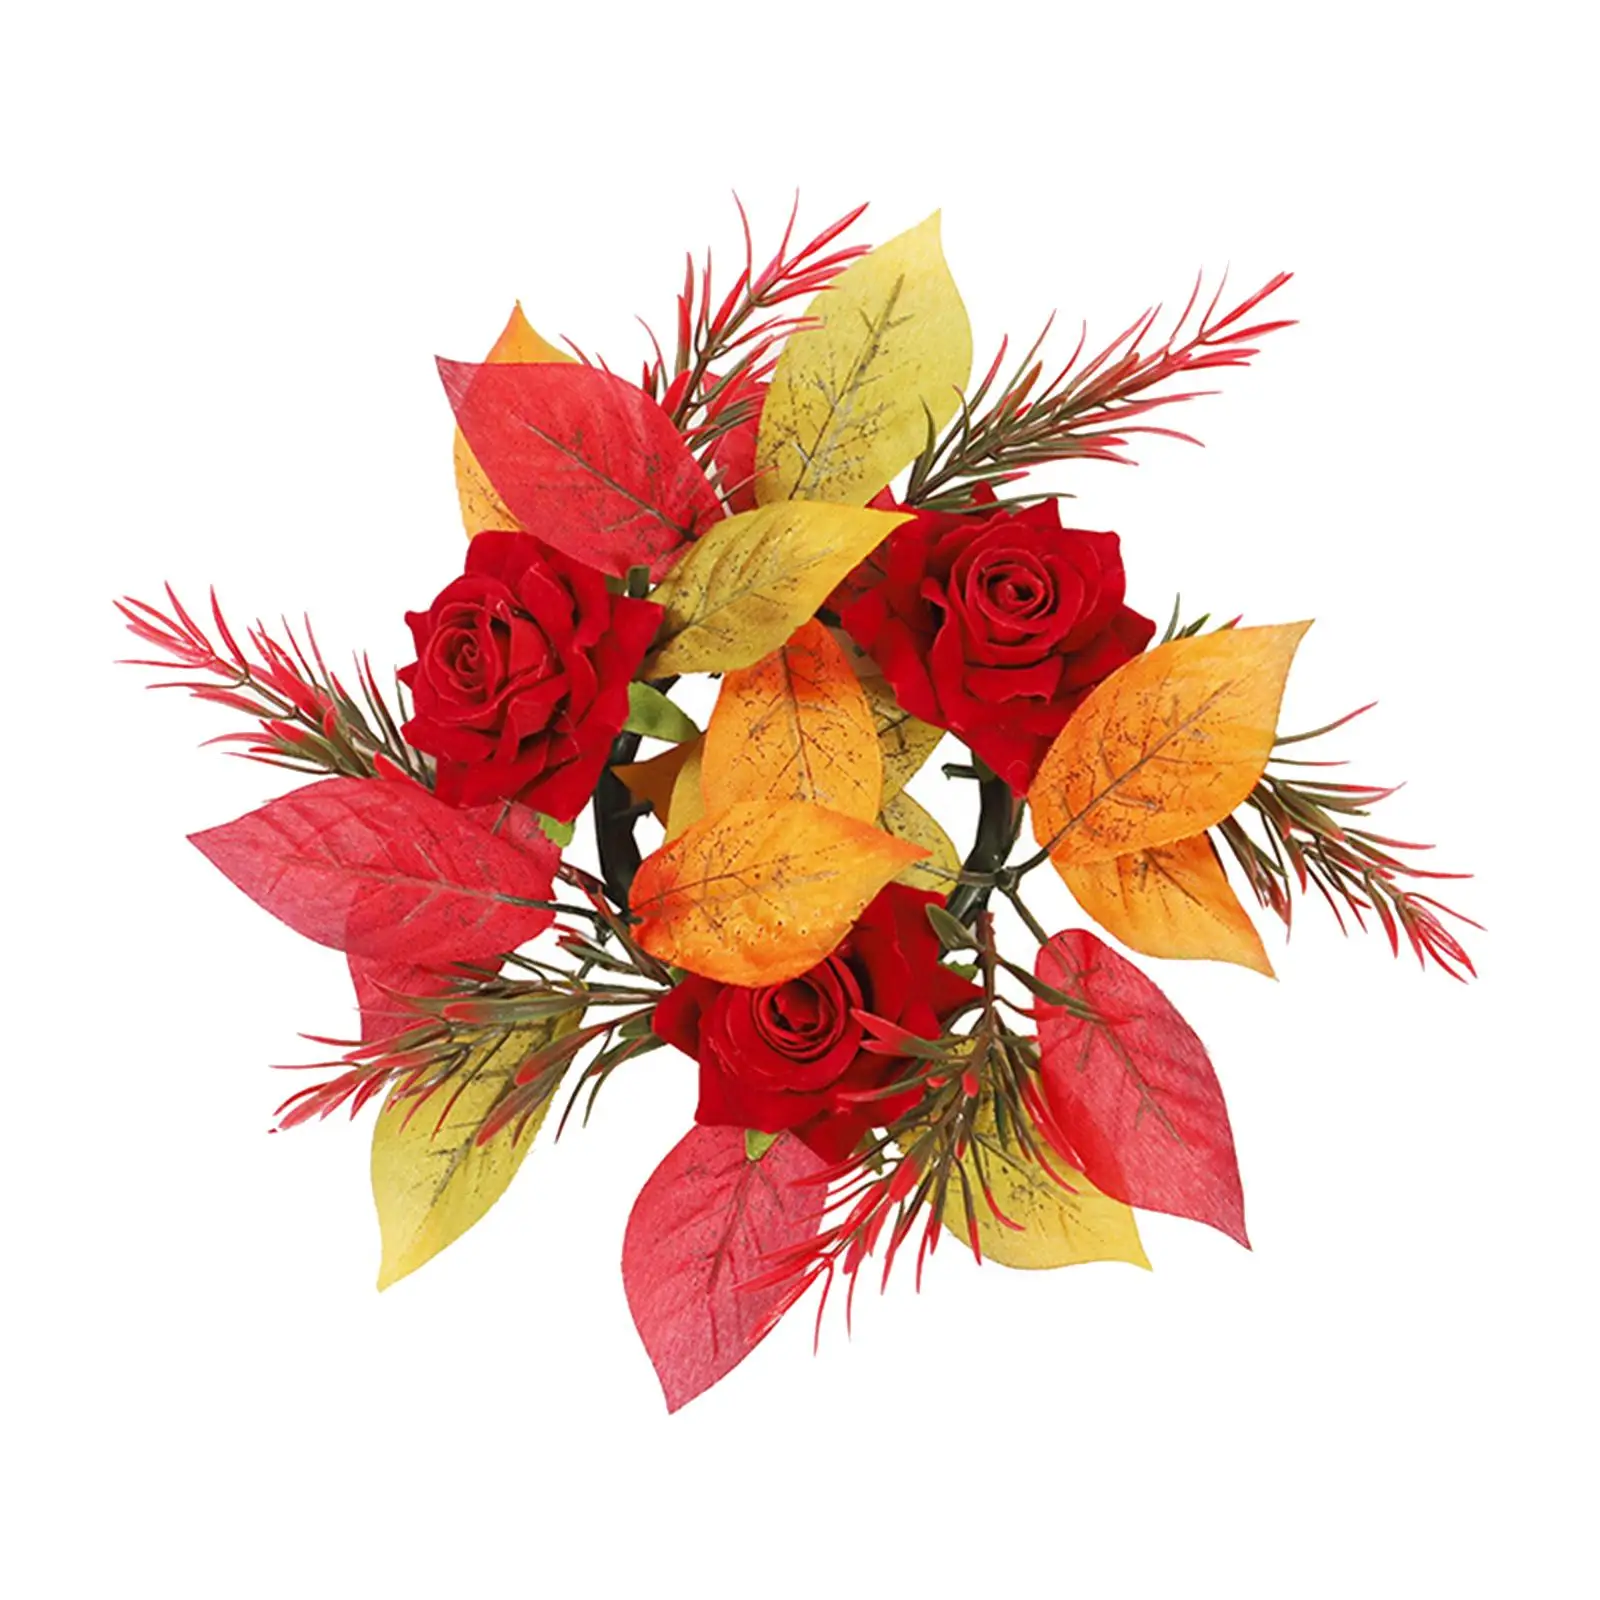 Candle Ring Wreath Fall Wreath Decorative Maple Leaves Wreath Candle Holder Rose Wreath for Centerpieces Festival Living Room